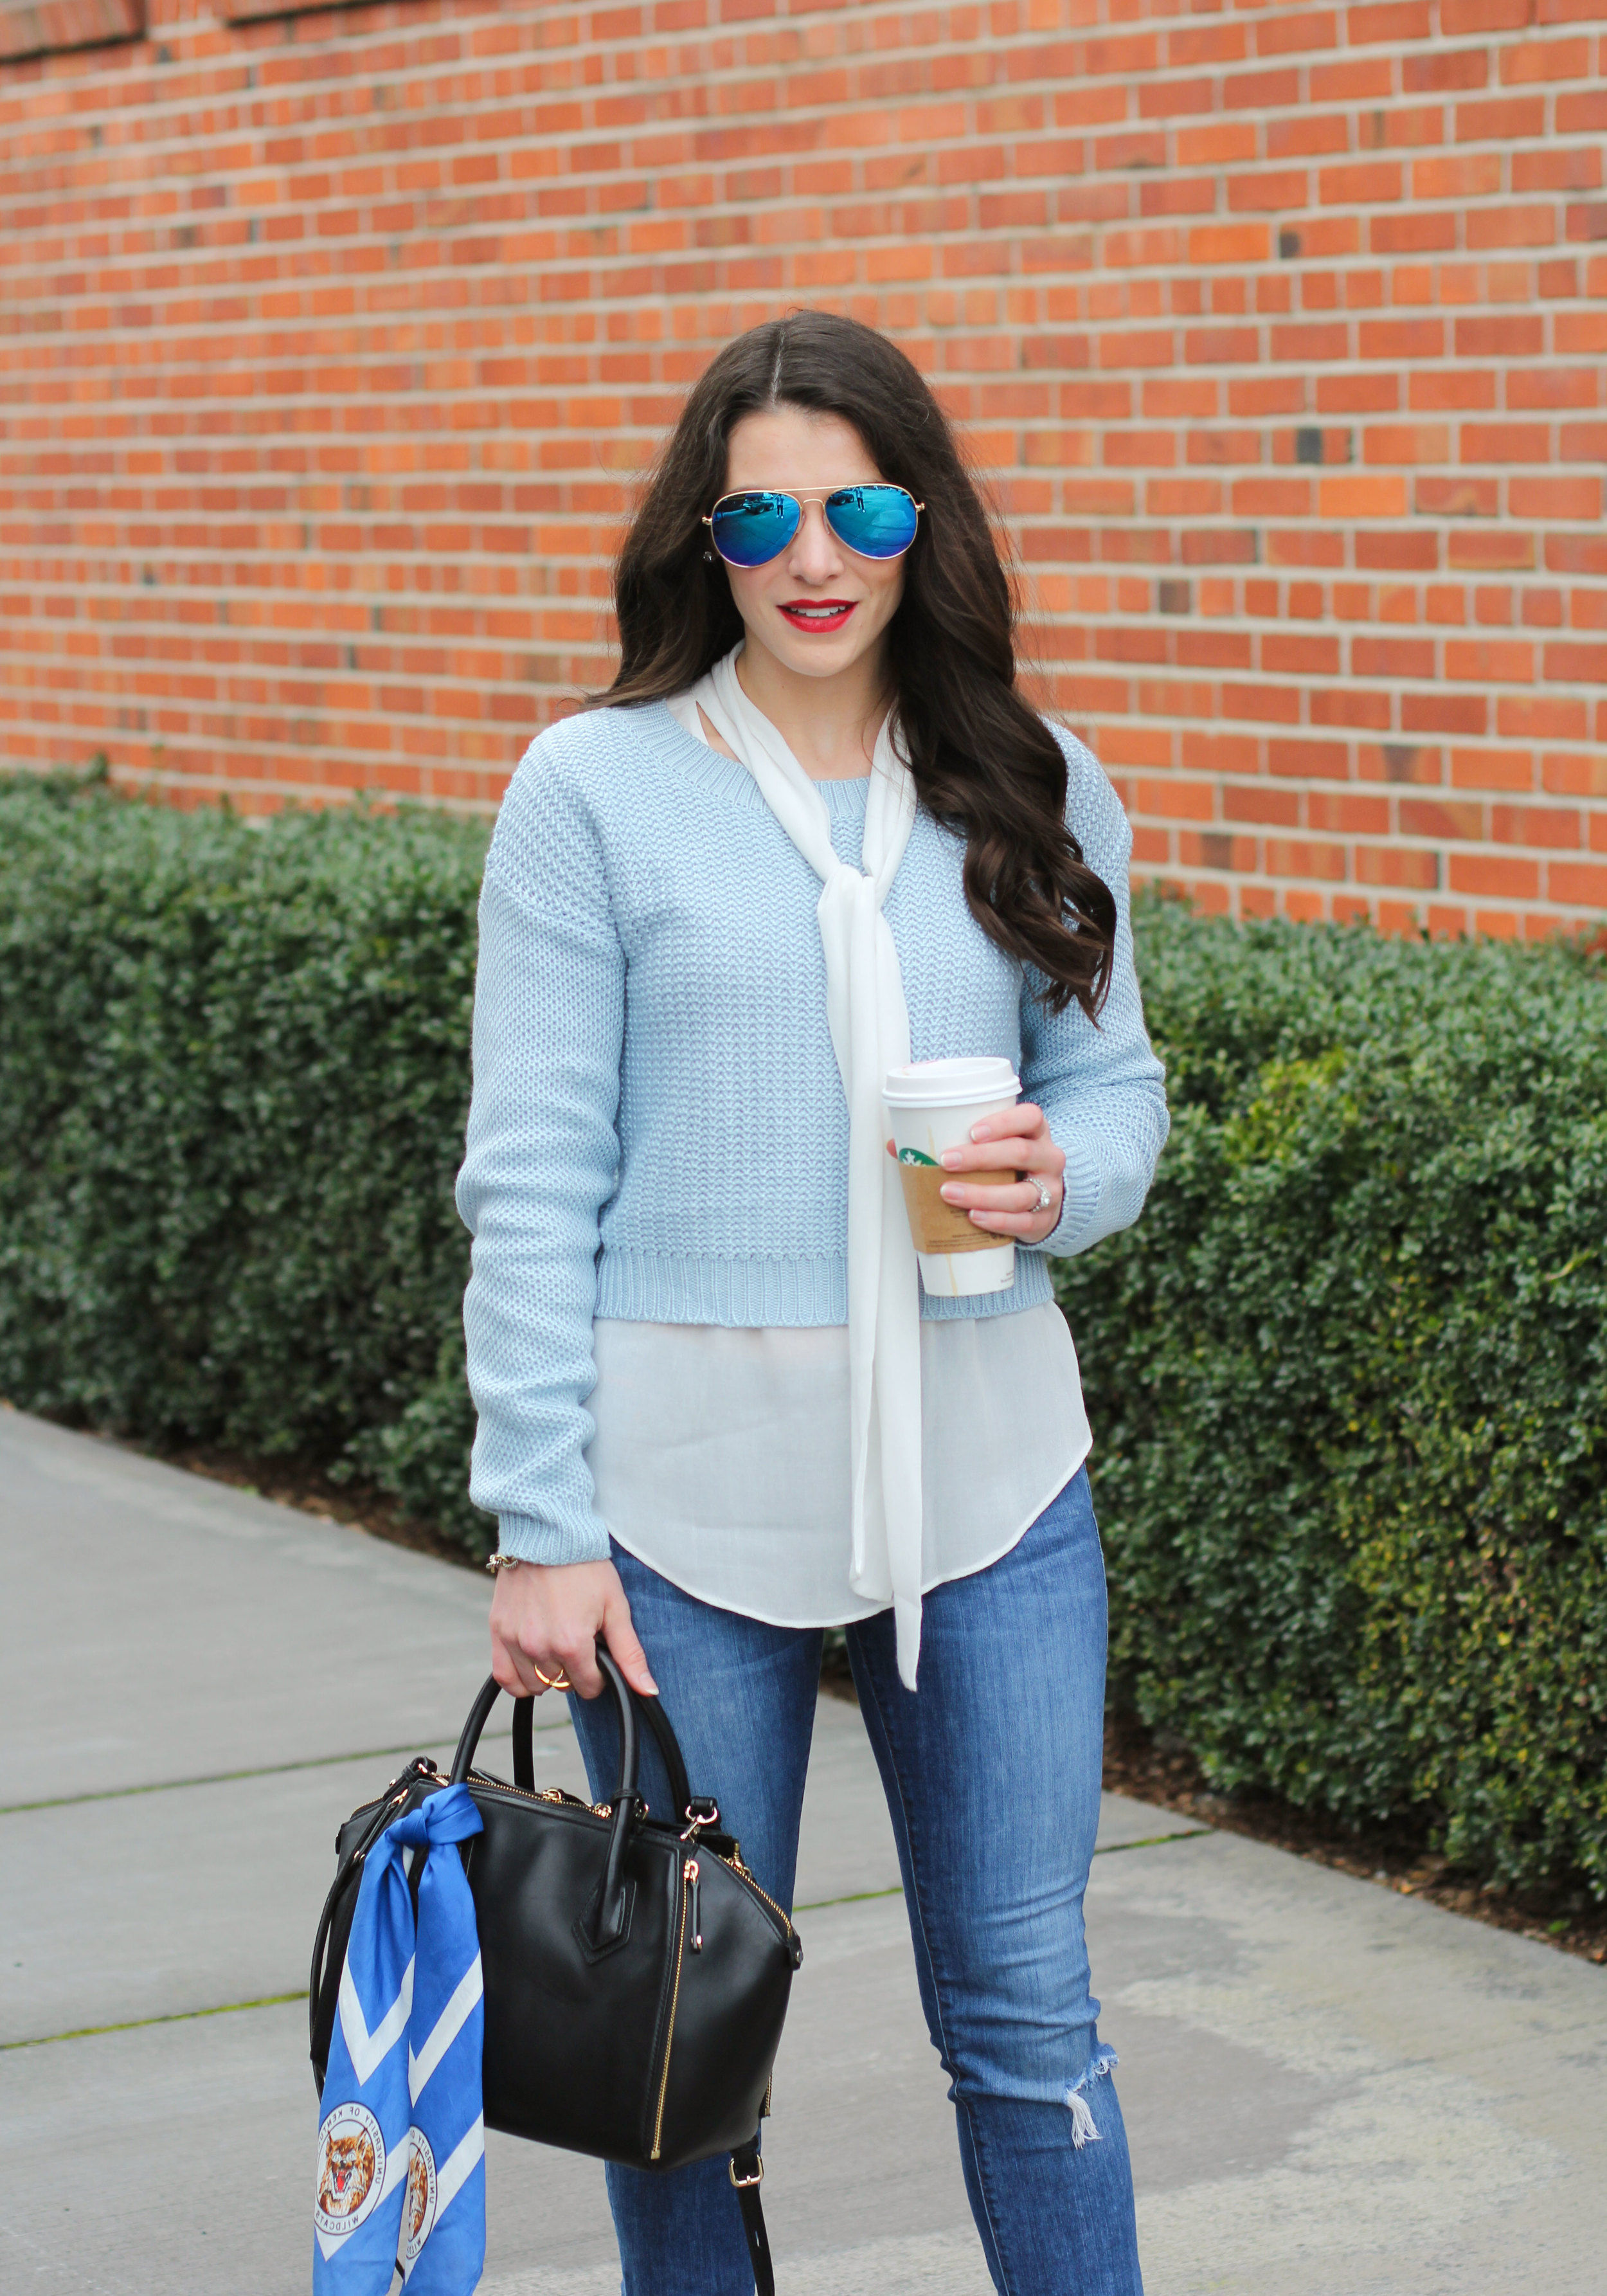 Winter Outfit, Cropped Sweater with Bow Blouse, Blue Mirrored Aviator Sunglasses, Rebecca Minkoff Mini Perry Satchel, Scarf Bag Accessory, Blue Suede Pumps